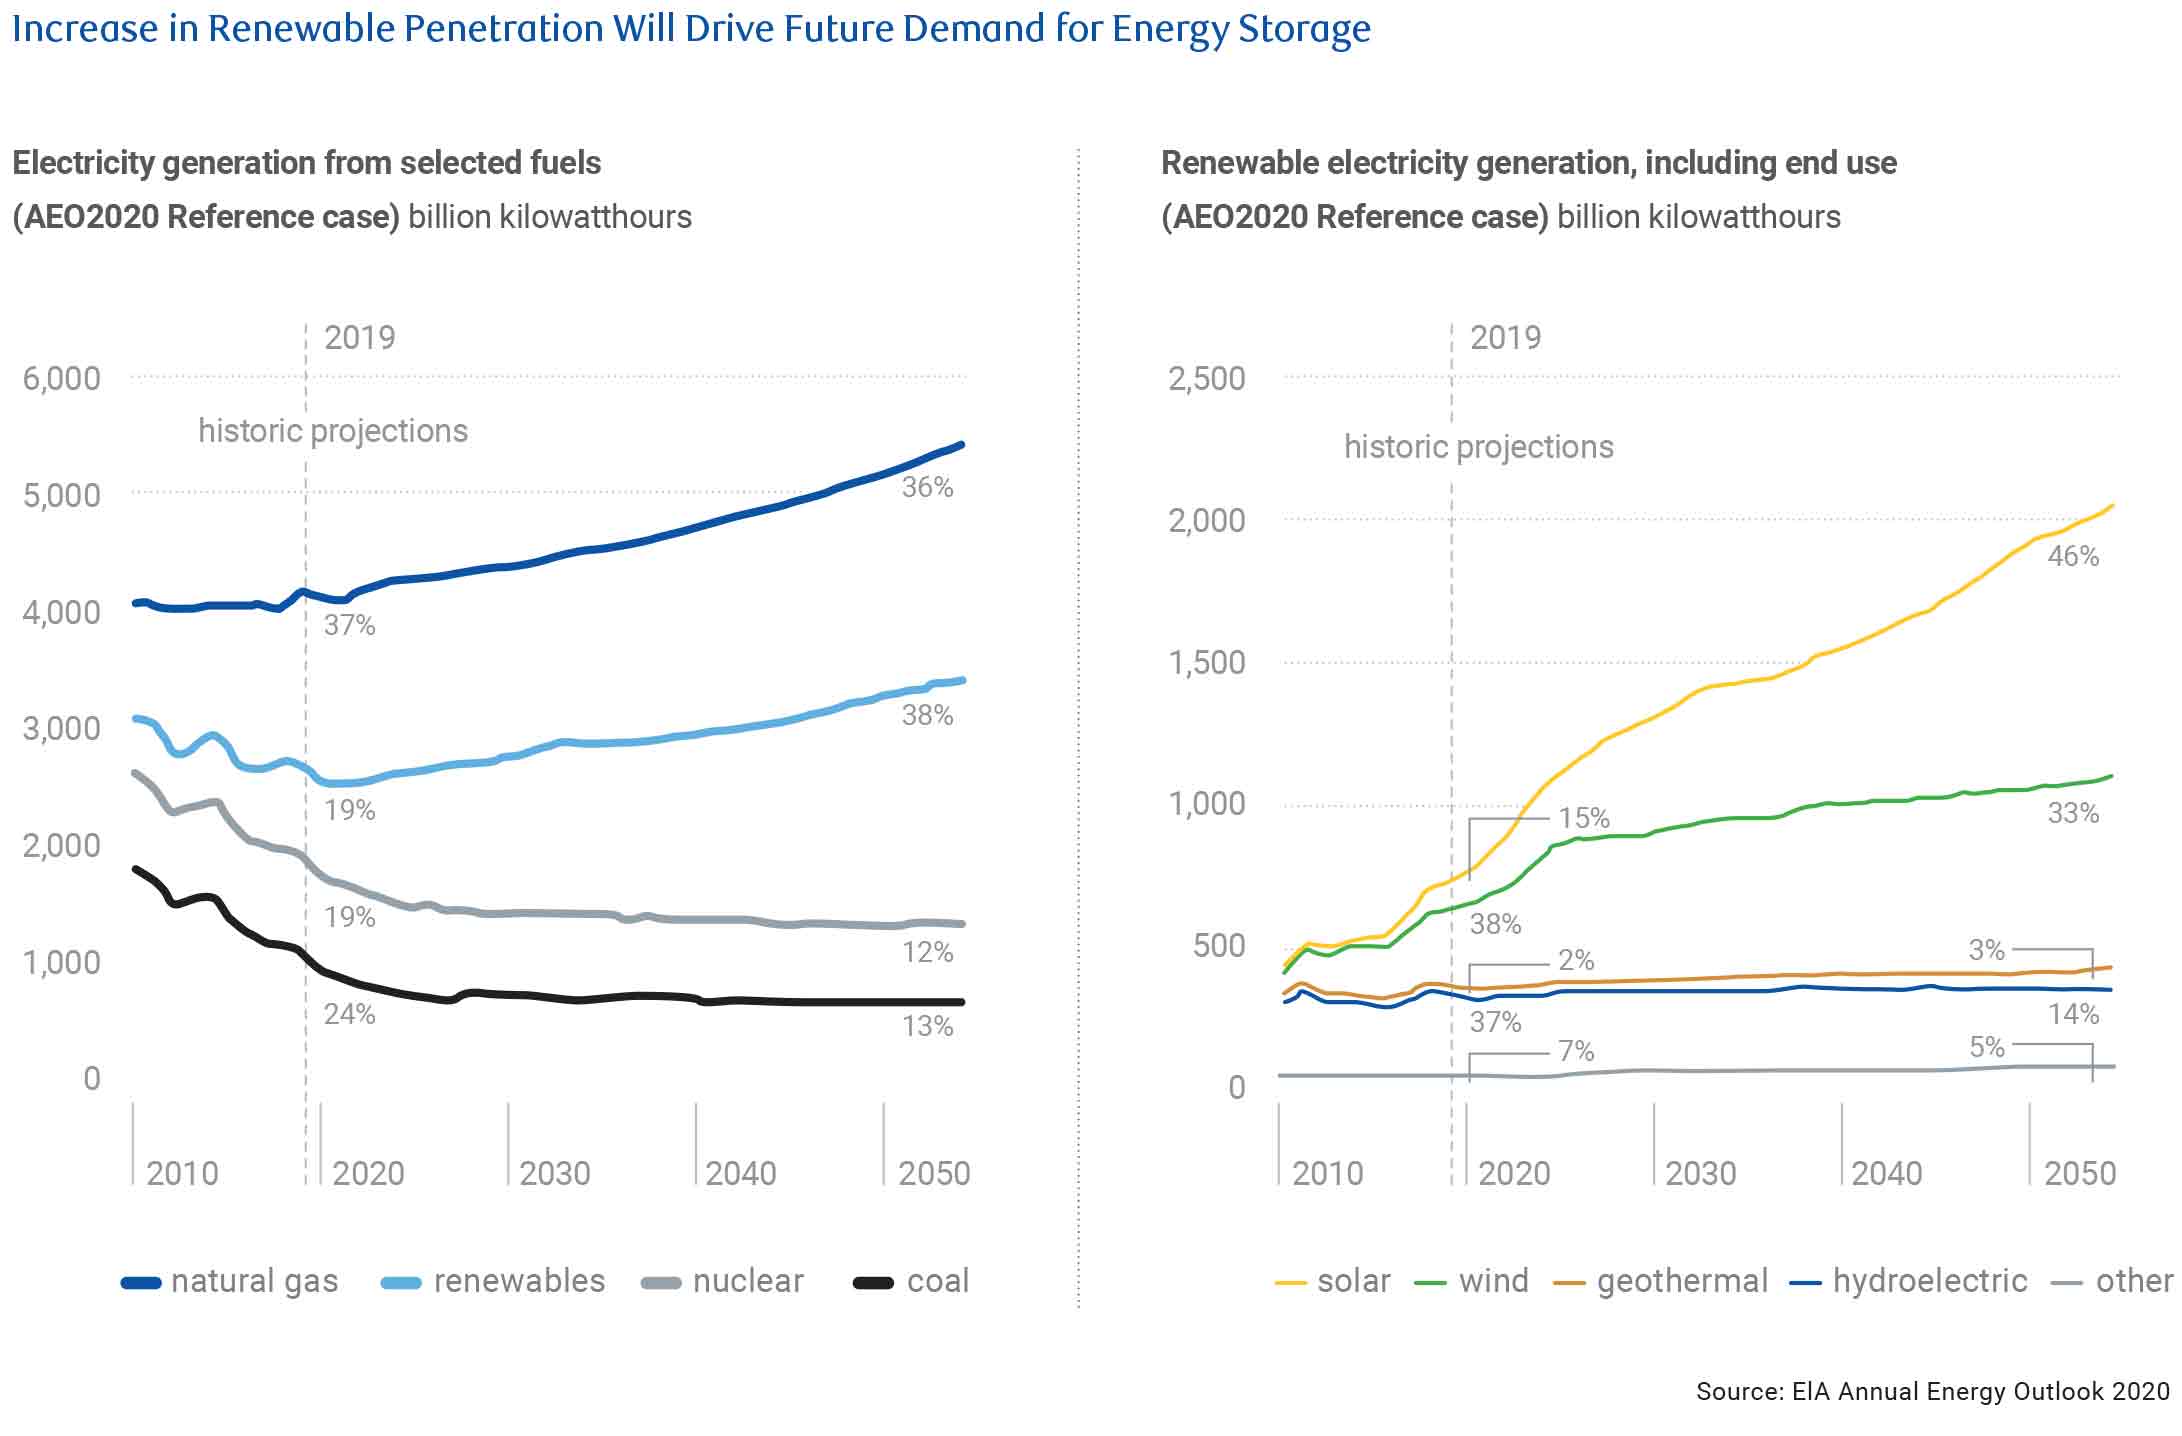 Increase in Renewable Penetration Will Drive Future Demand for Energy Storage